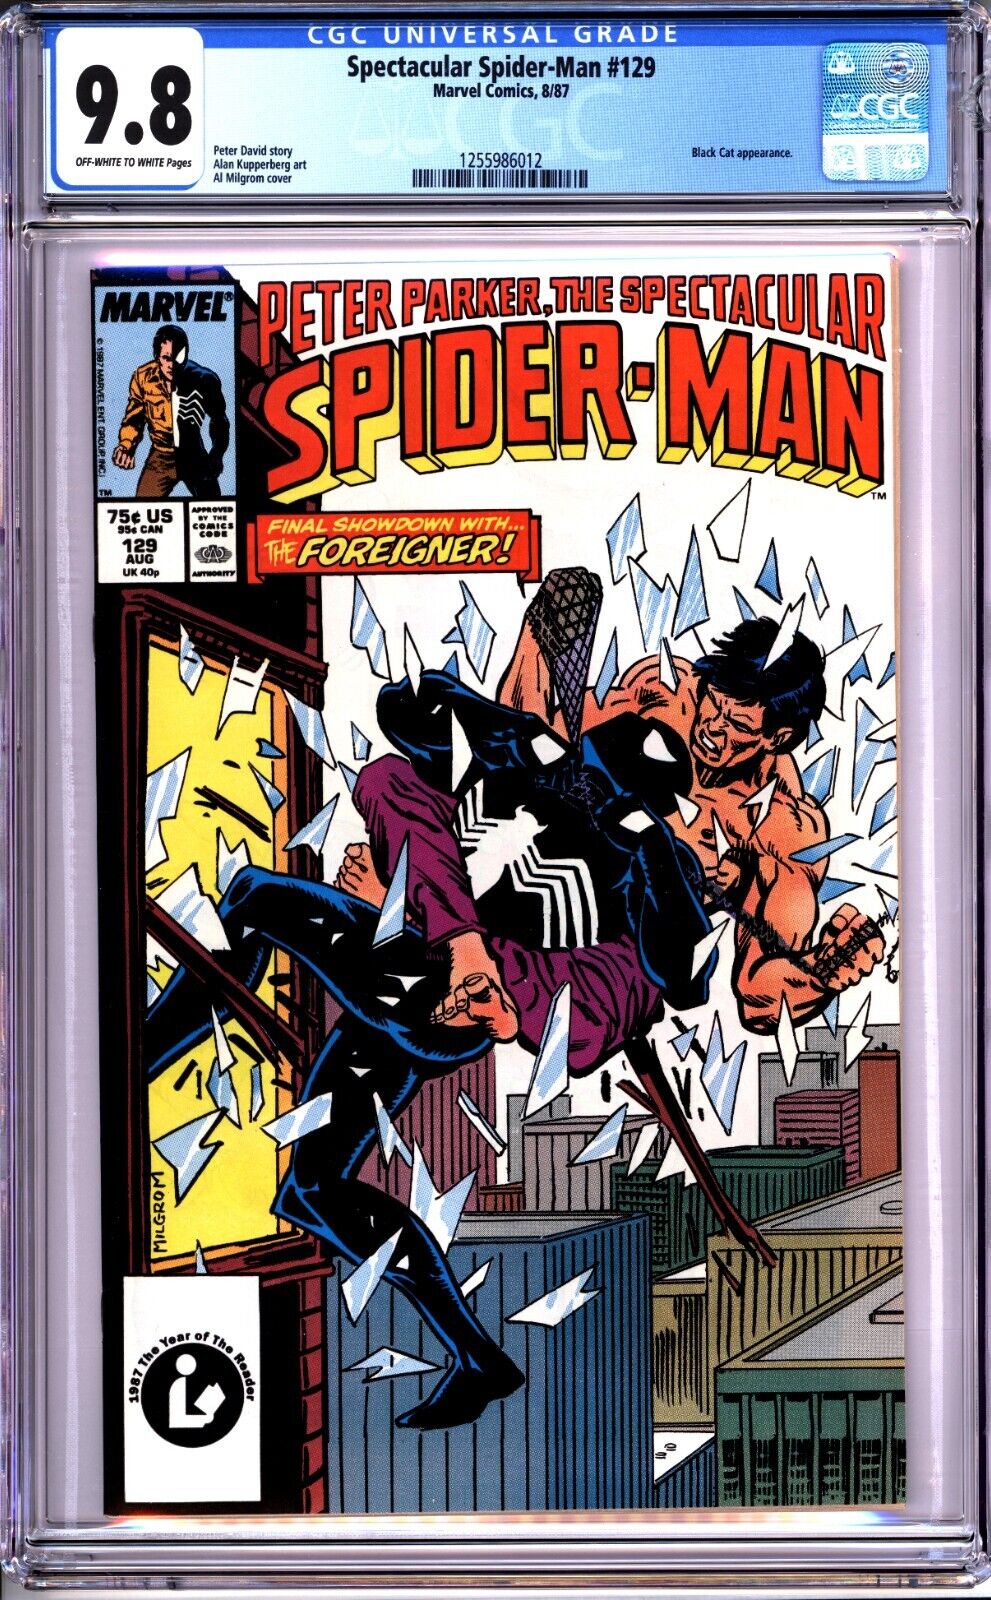 SPECTACULAR SPIDER-MAN #129- CGC 9.8 oWP - DIRECT EDITION - CRACKED CASE BARGAIN